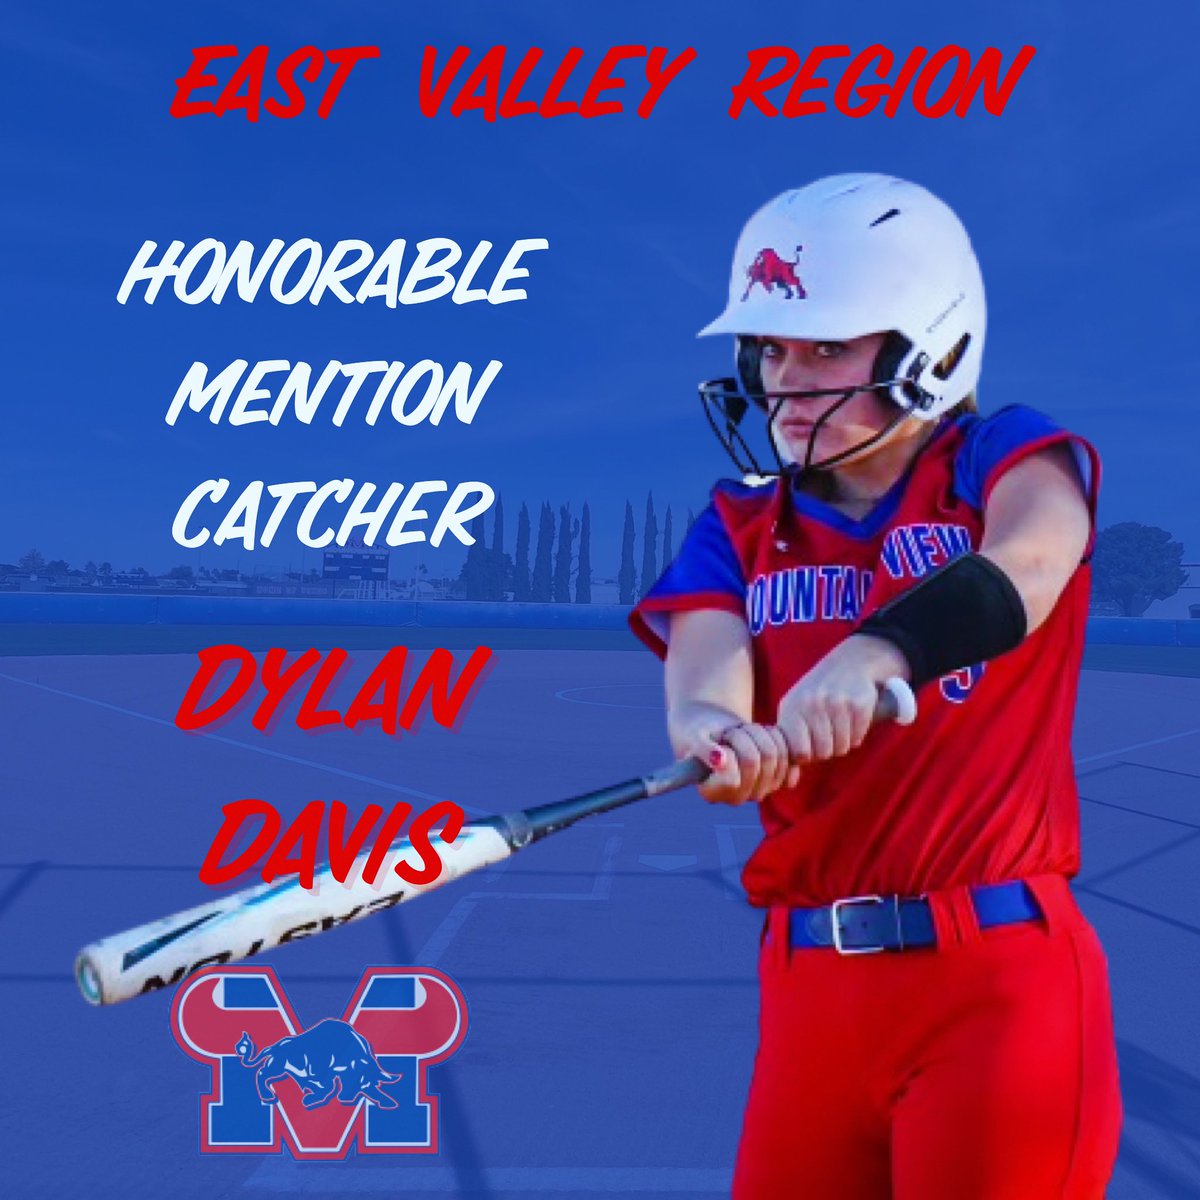 Freshman Dylan Davis is awarded Honorable Mention Catcher for East Valley Region. Congratulations on a great season Dylan!